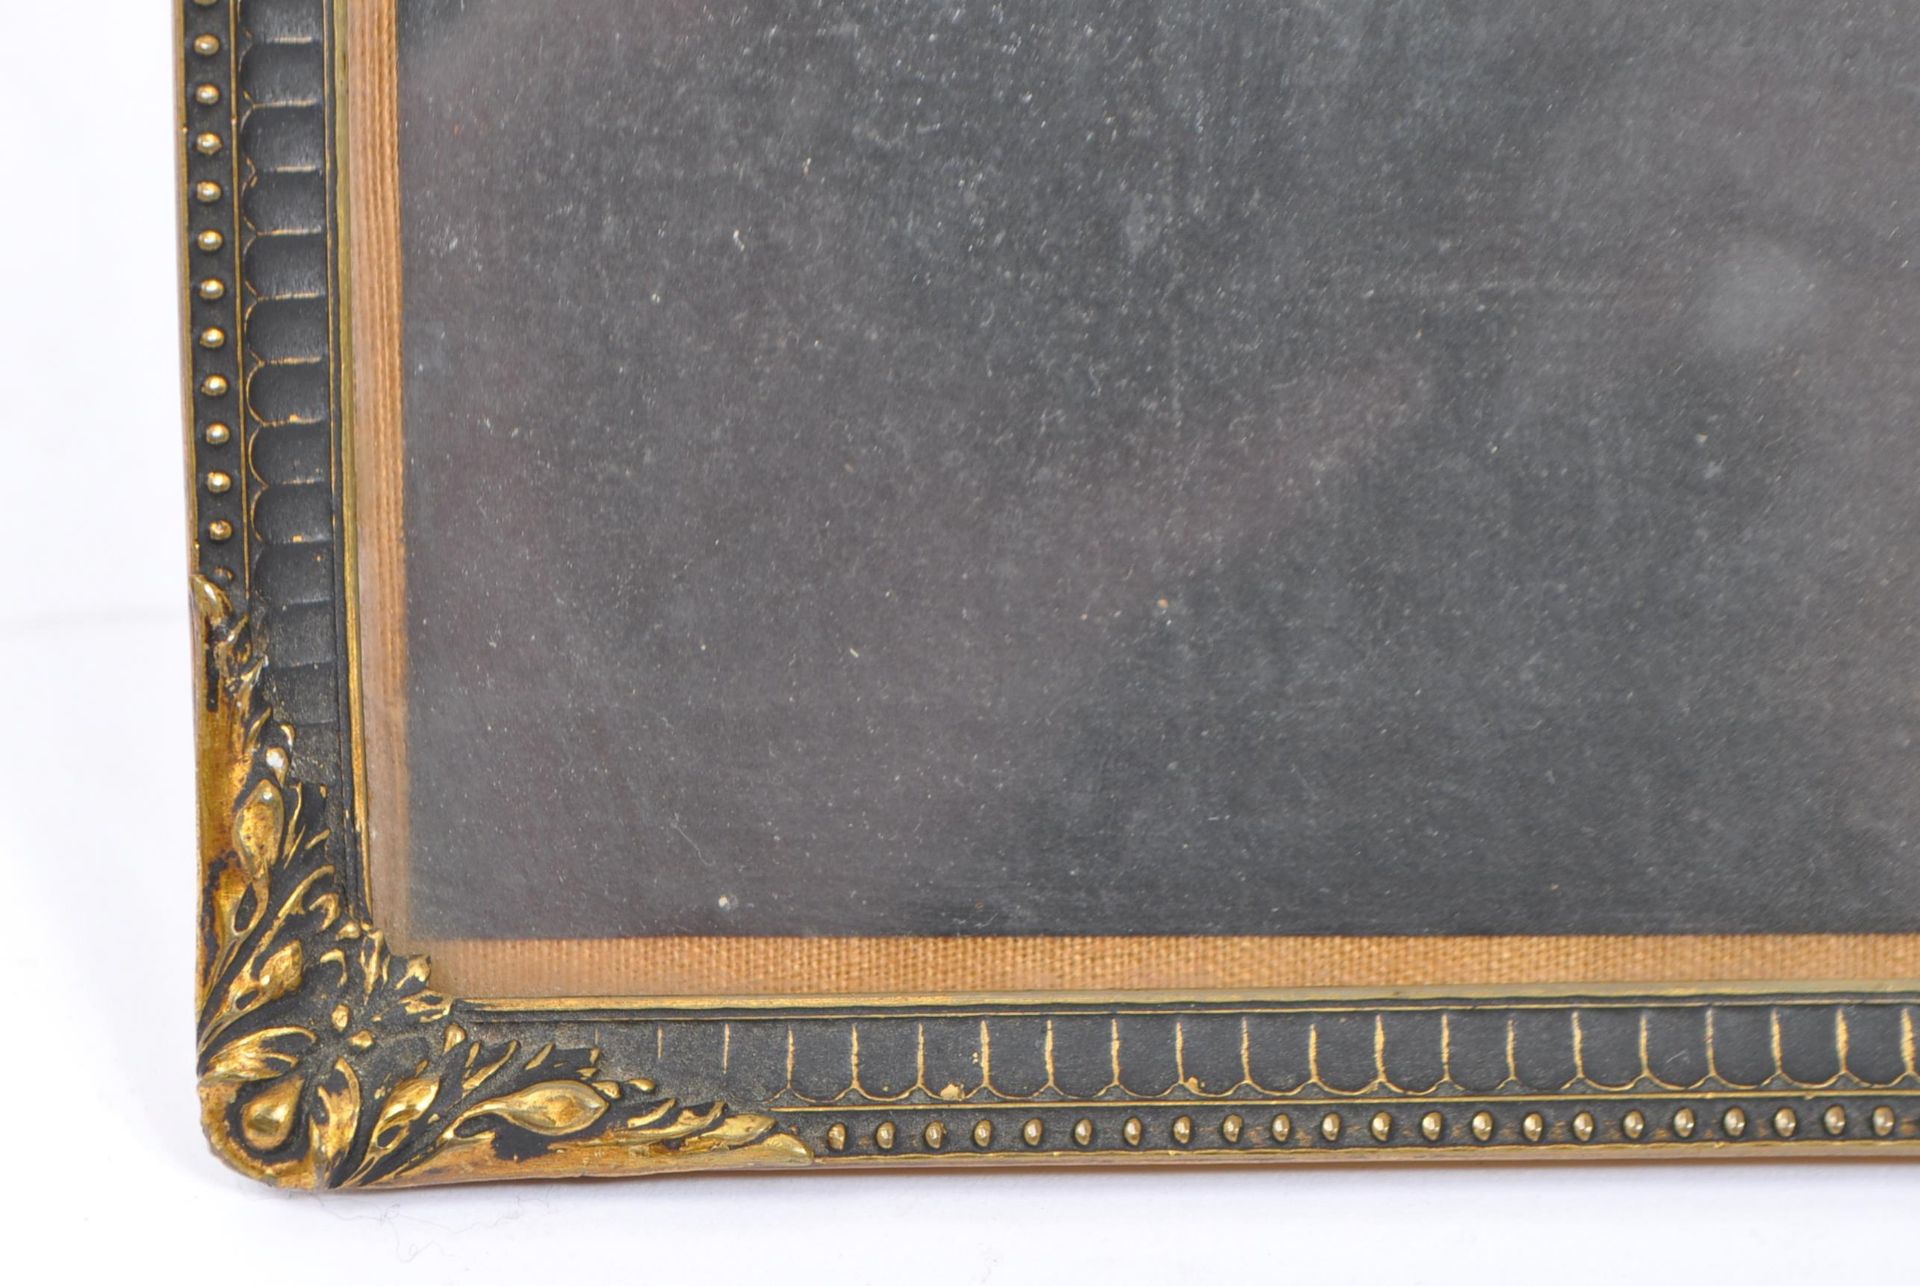 LARGE EARLY 20TH CENTURY FRENCH GILT METAL FRAME - Image 3 of 4